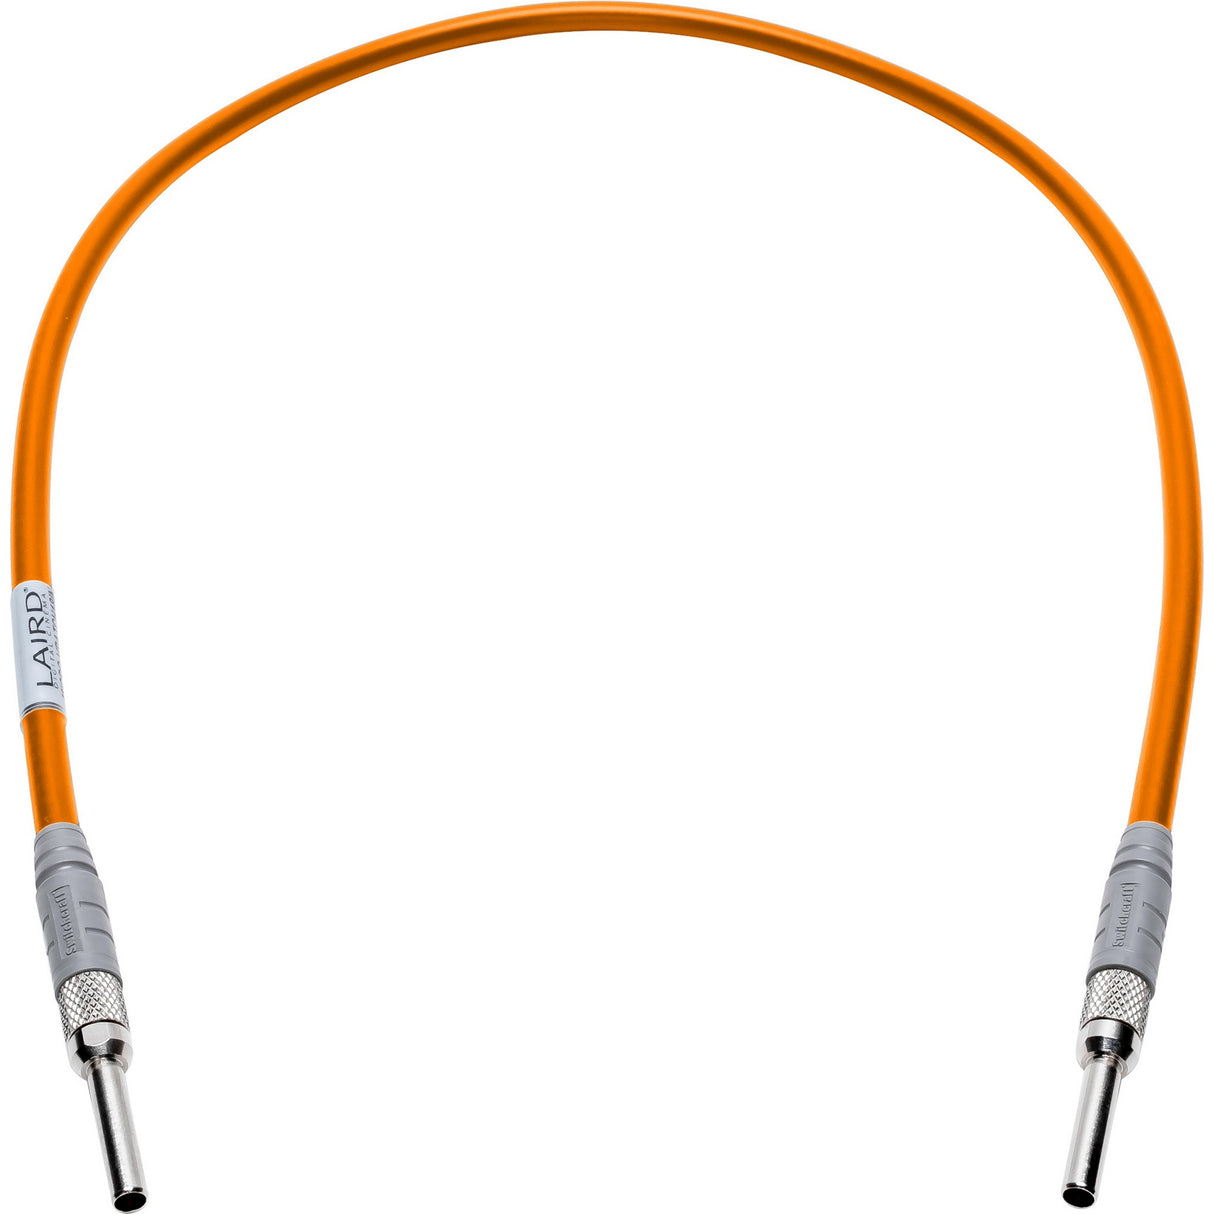 Laird MICRO-VPATCH-010OE 12G-SDI Micro Video Patch Cable, Orange, 10-Feet